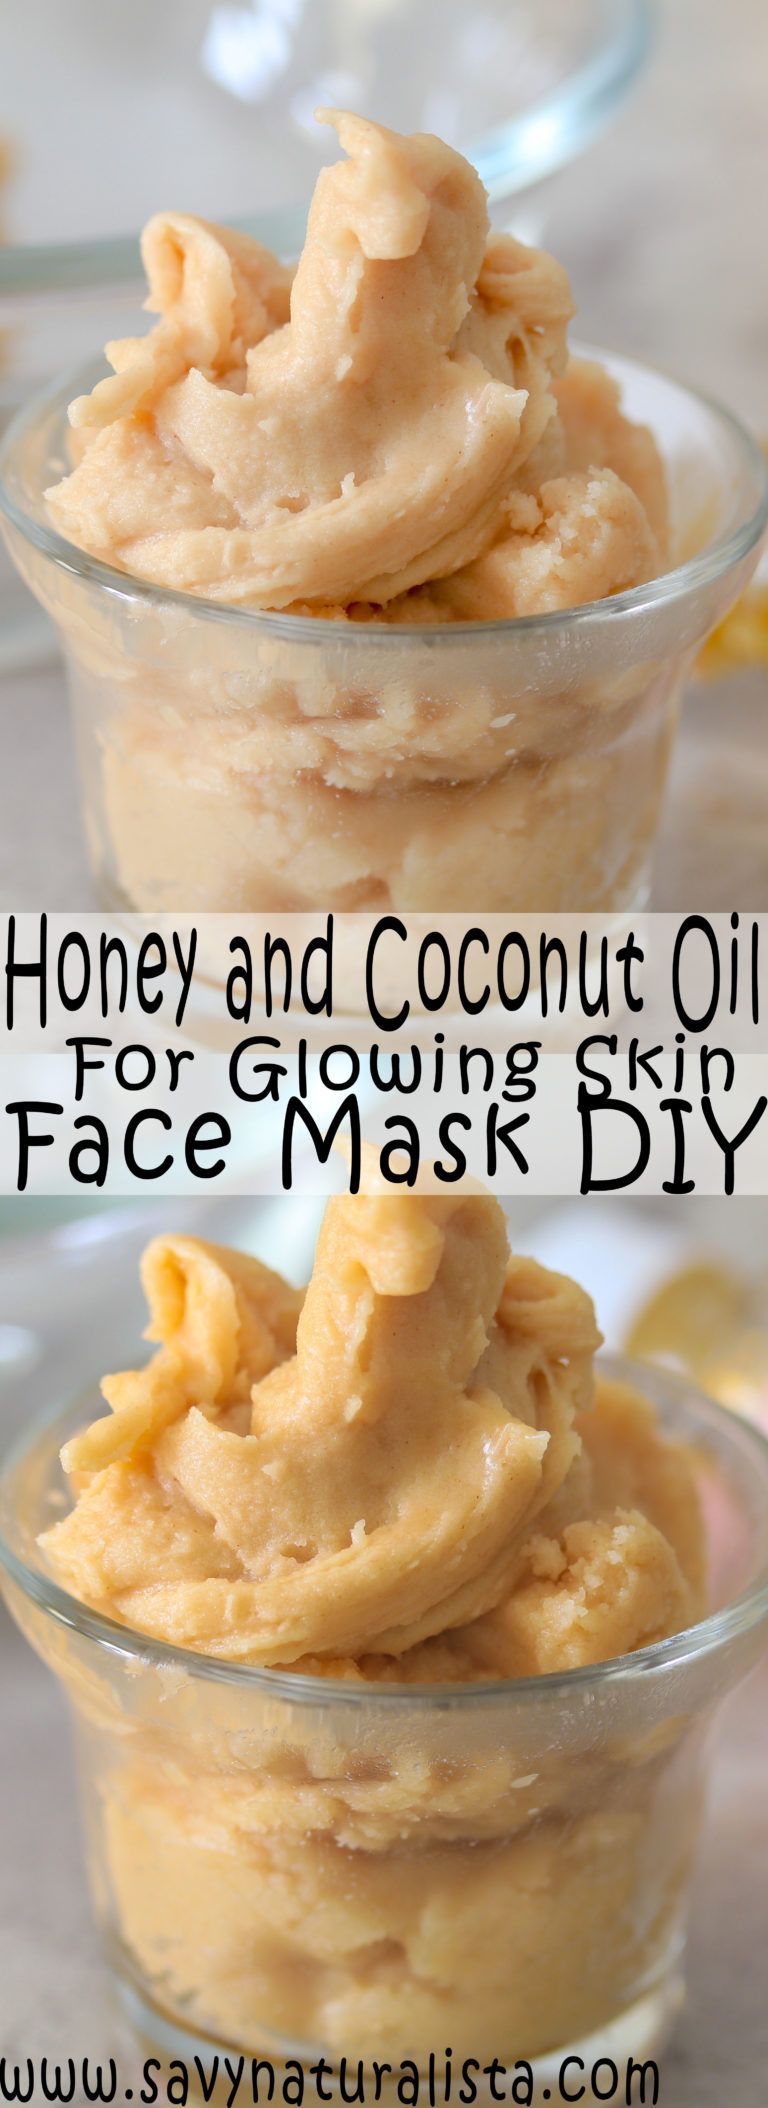 Honey and Coconut Oil Glowing Face Mask  - Savvy Naturalista - Honey and Coconut Oil Glowing Face Mask  - Savvy Naturalista -   18 diy Face Mask natural ideas